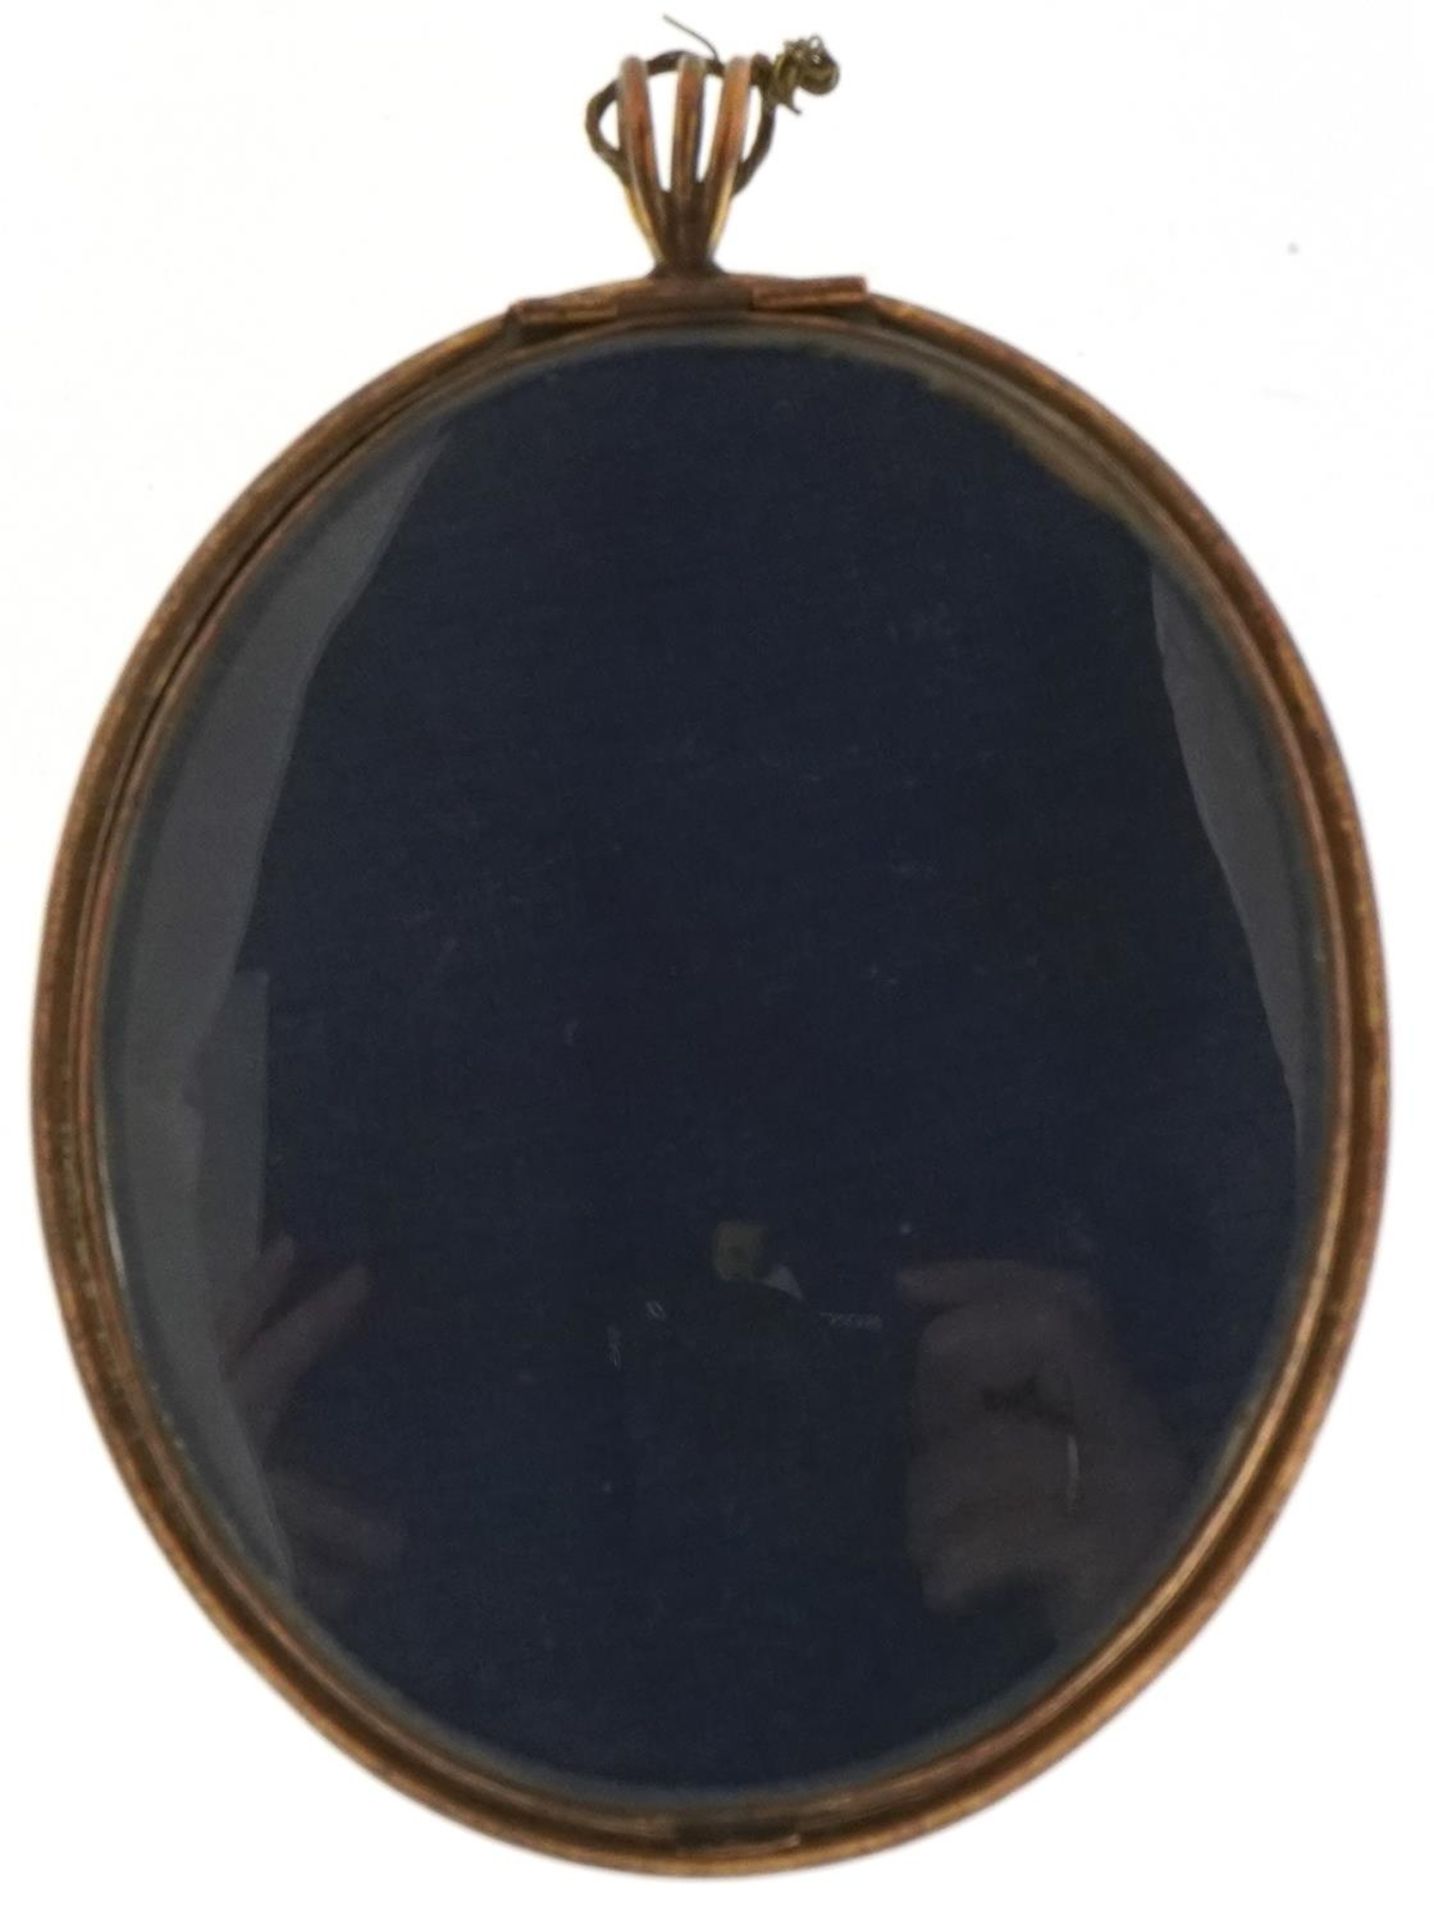 Manner of Andrew Plimer, Early 19th century oval hand painted portrait miniature of a female with - Image 3 of 3